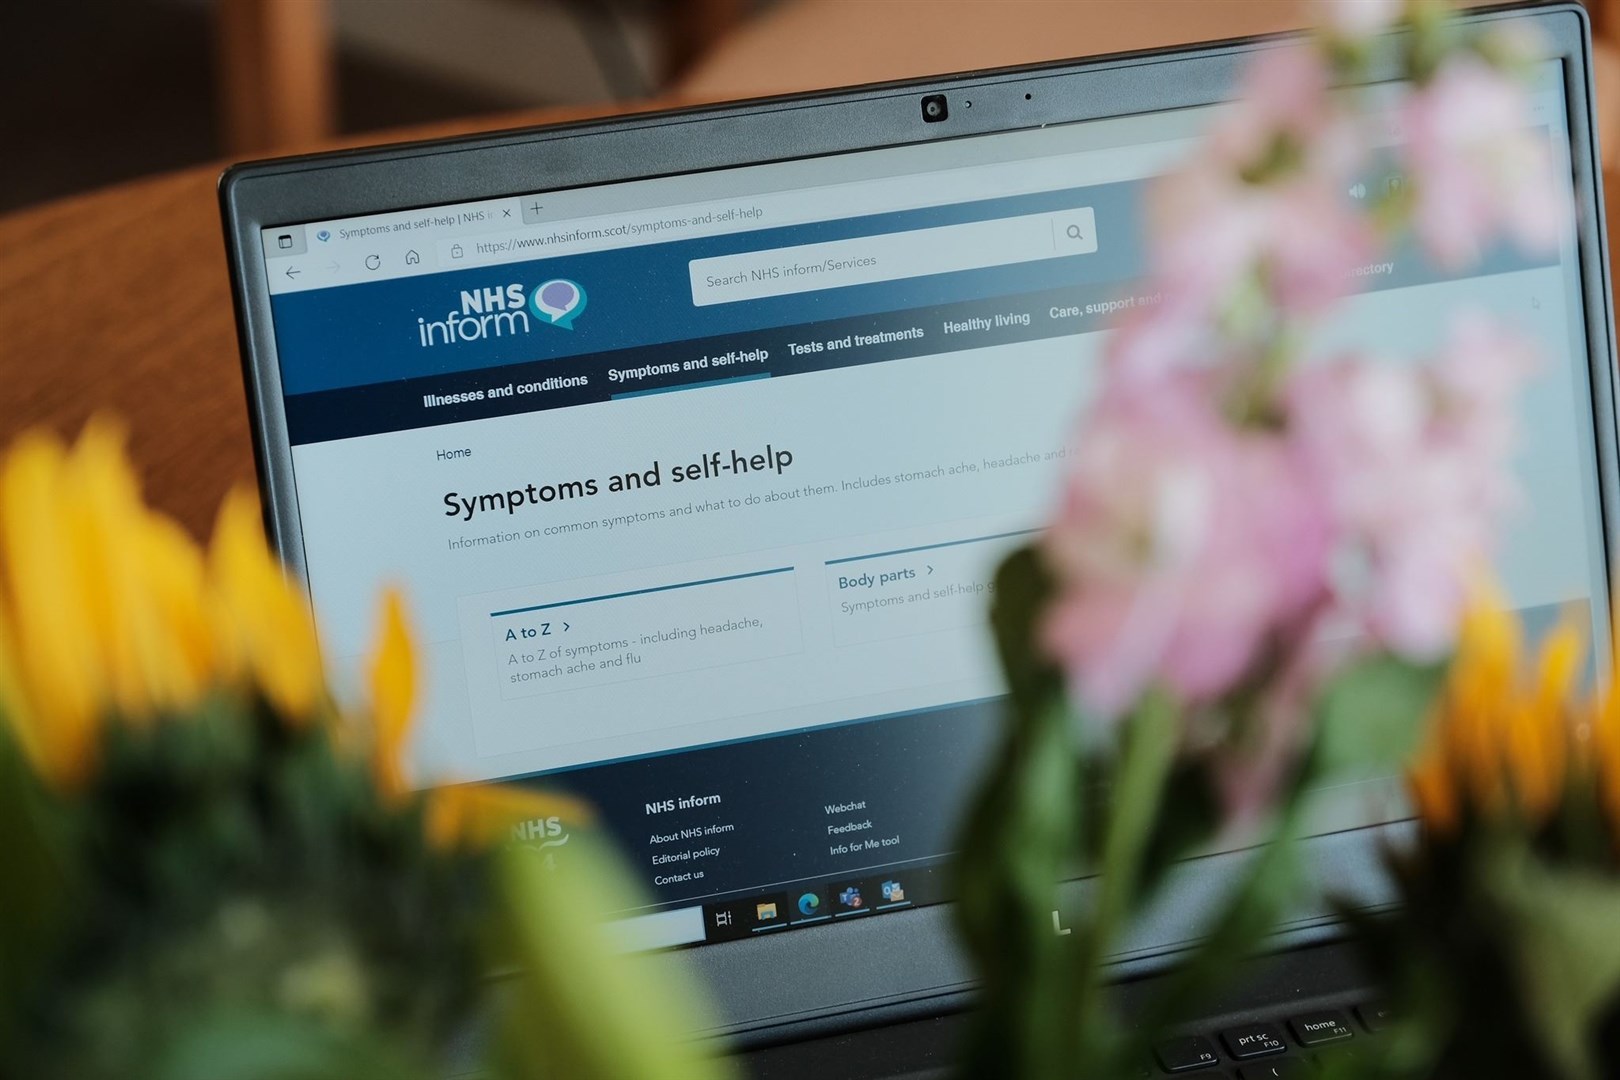 Other great resources such as symptom checkers can provide health advice as calling.